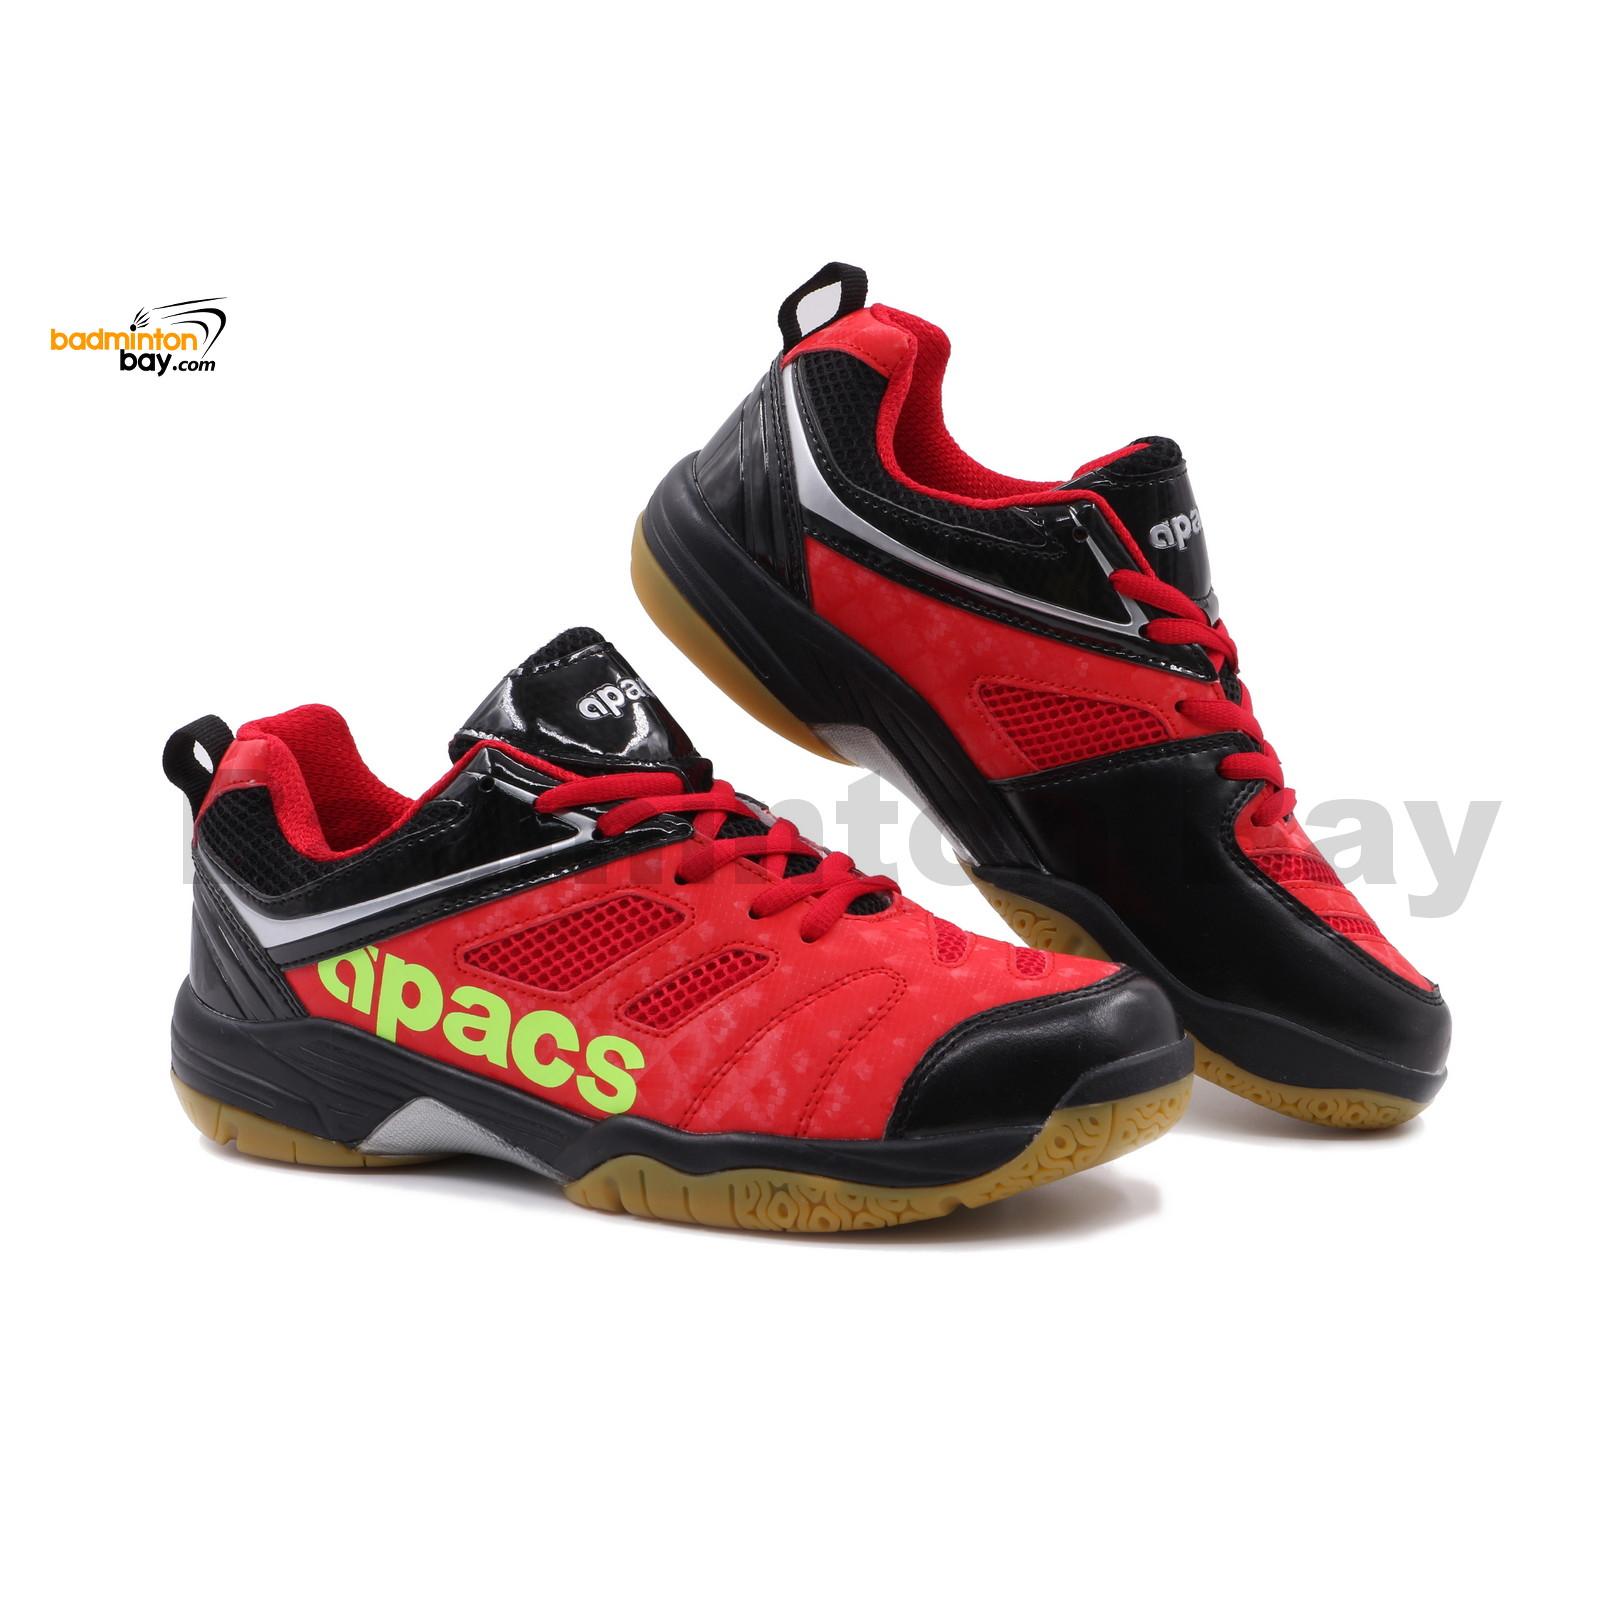 Apacs Cushion Power SP-606 Red Black Badminton Shoes With Improved ...